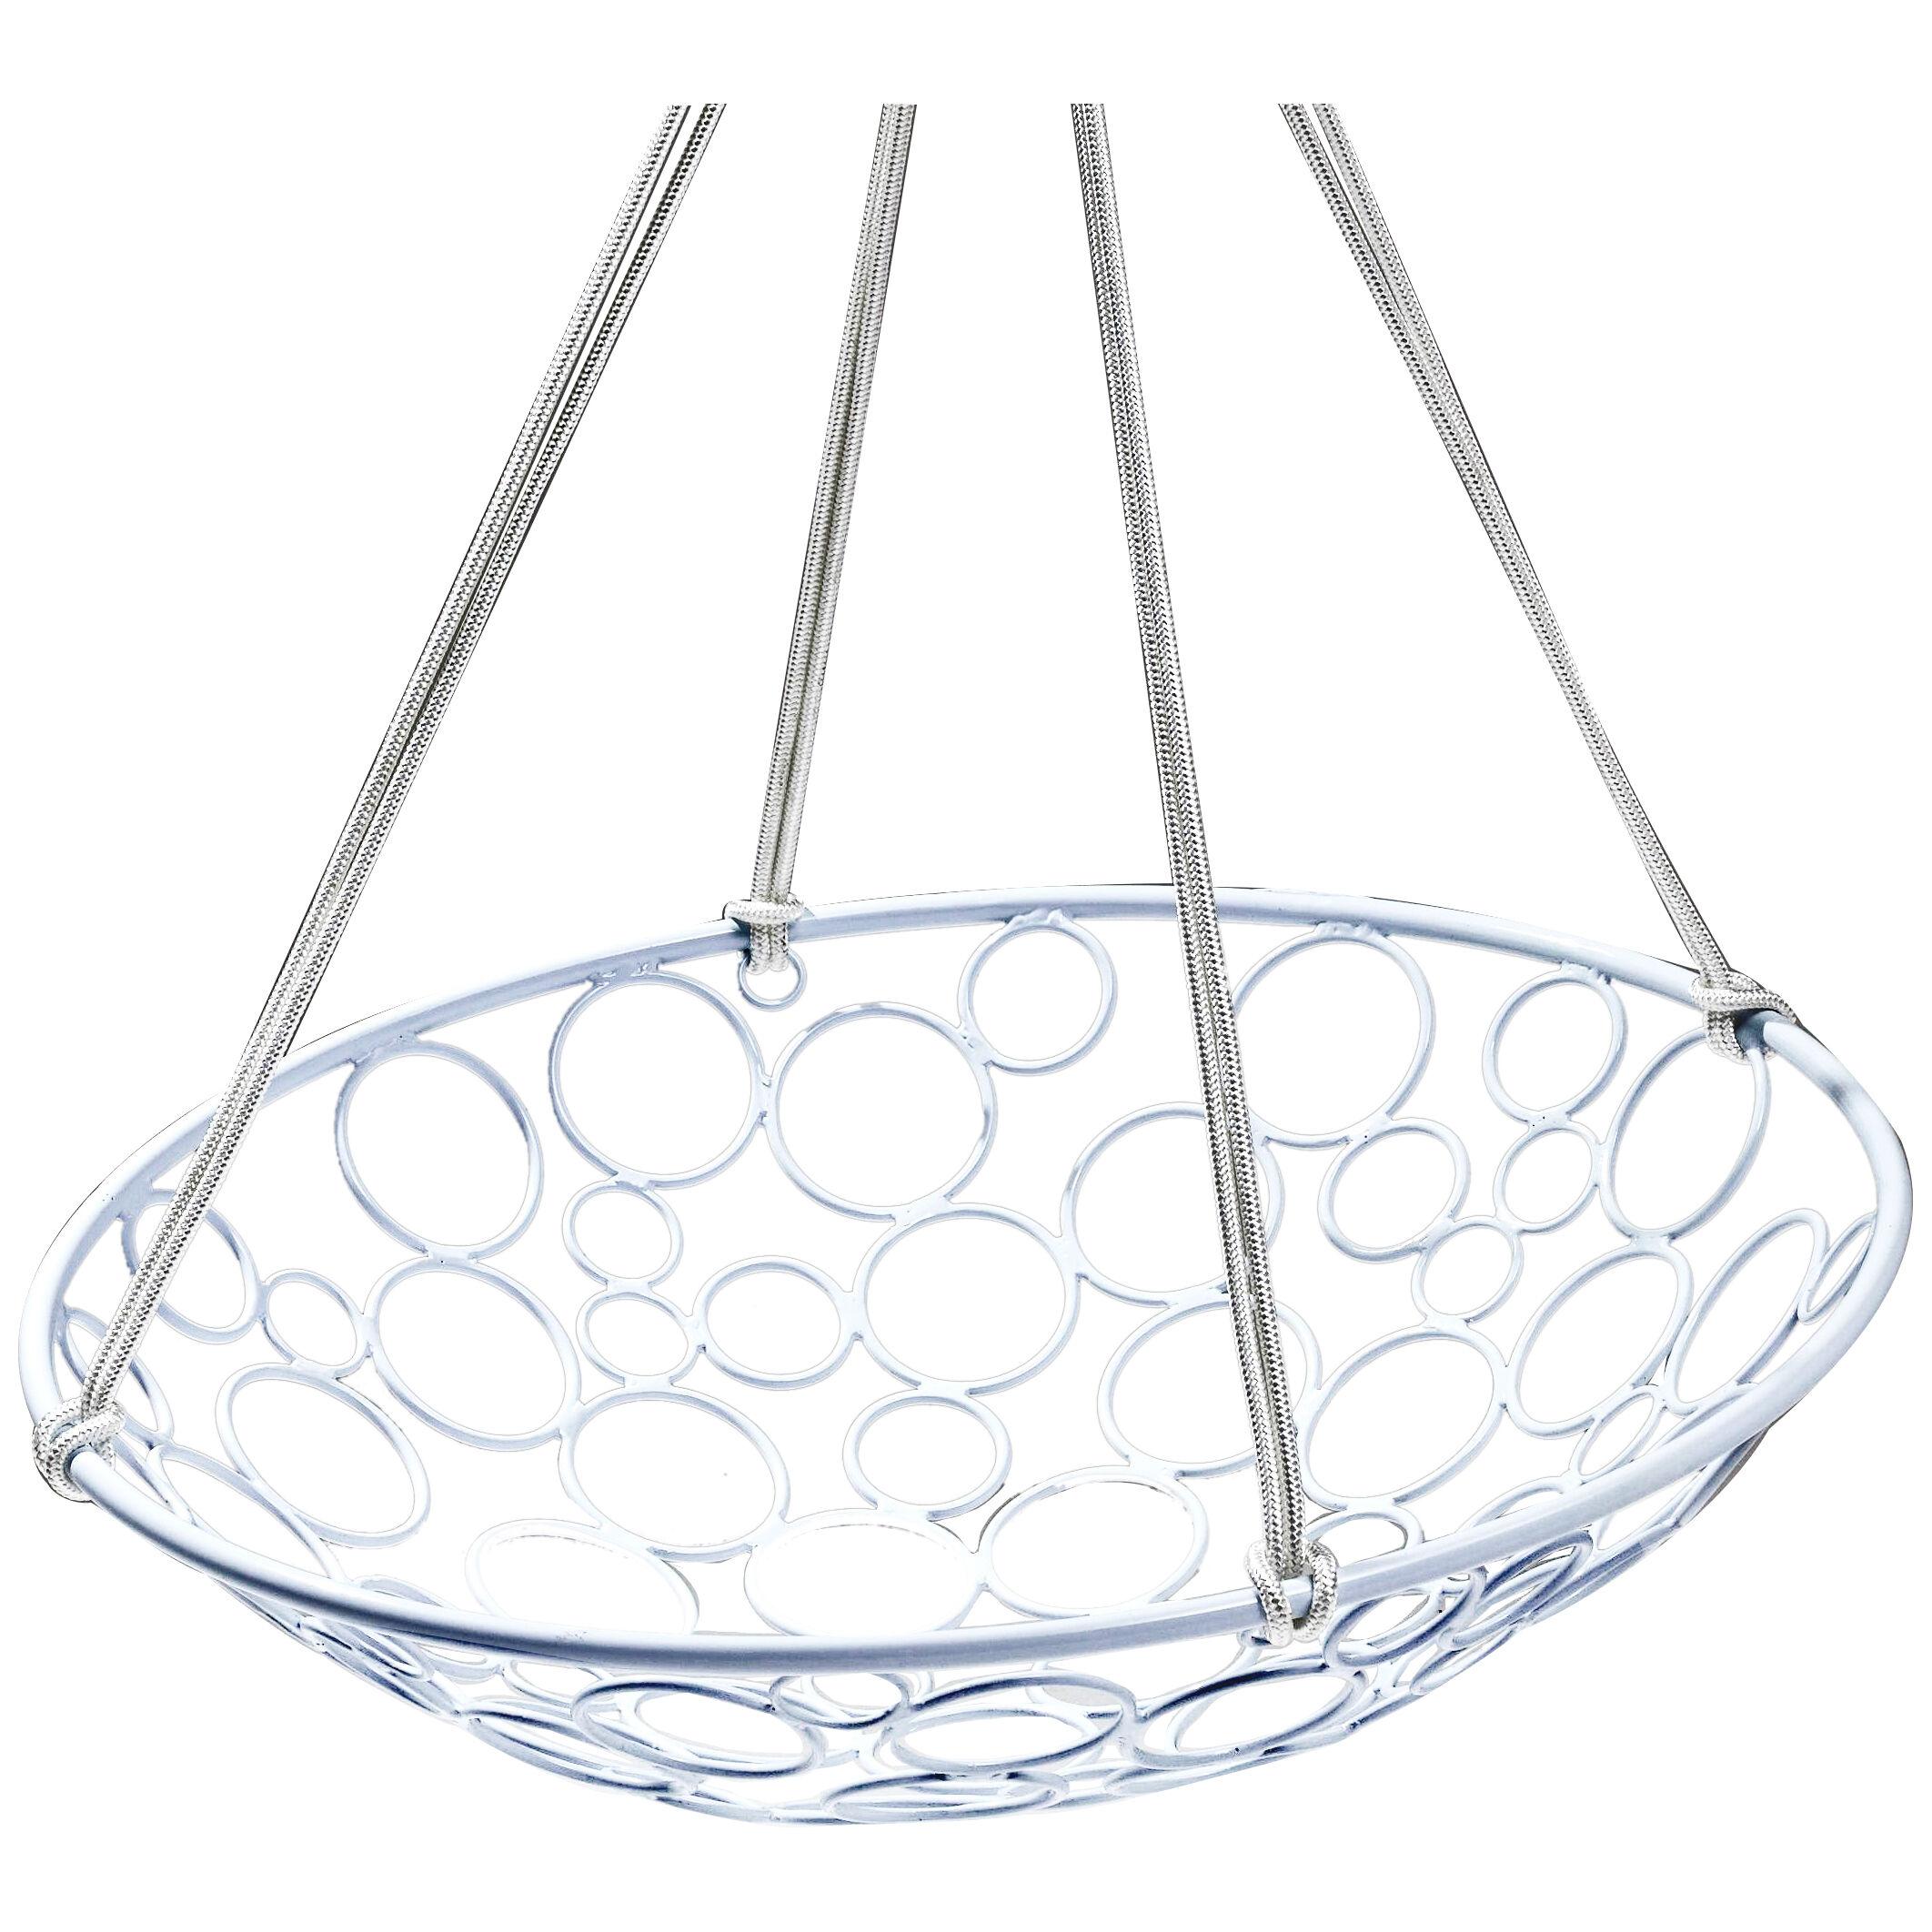 'BASKET - Circle' Hanging Swing Chair in White by Studio Stirling